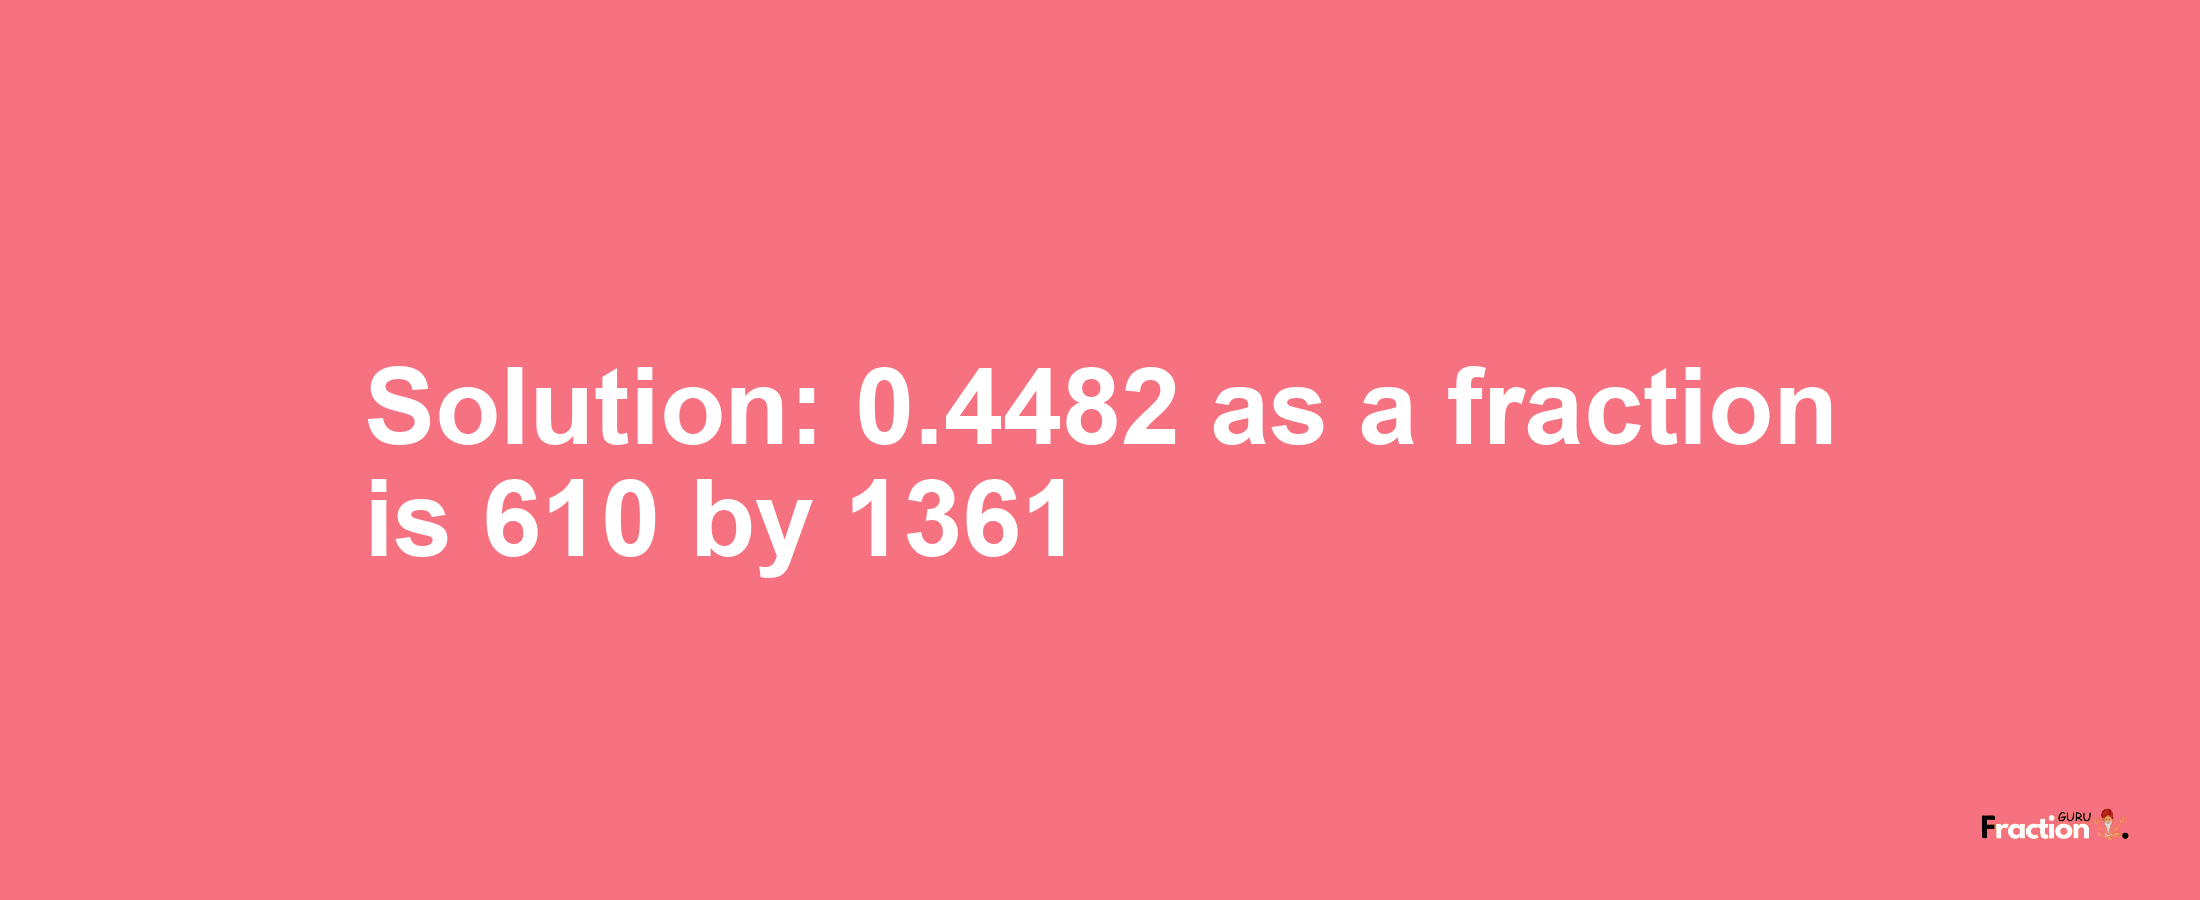 Solution:0.4482 as a fraction is 610/1361